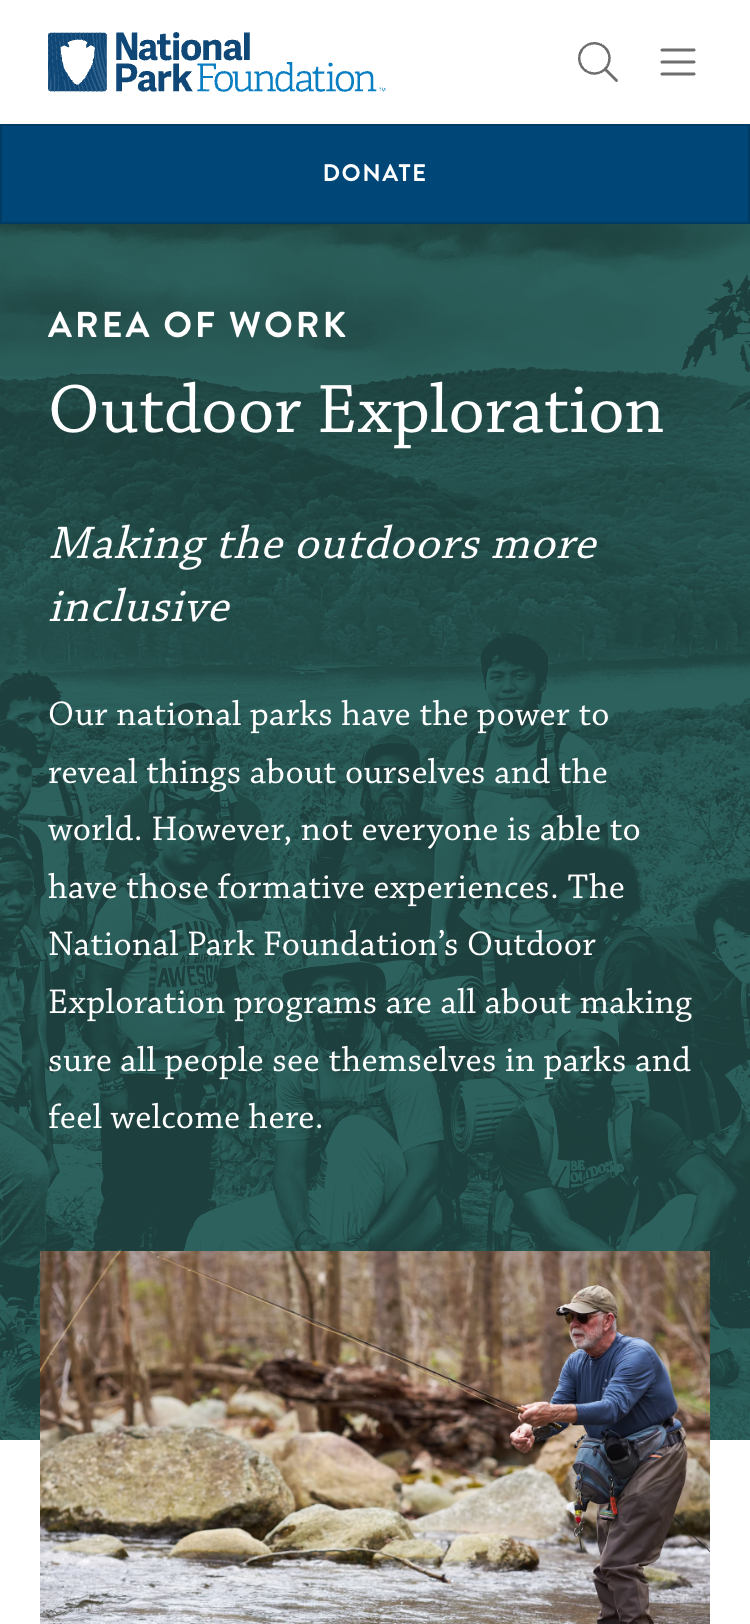 Mobile screenshot of the 'Outdoor Exploration' page of the National Park Foundation website. The header contains the National Park Foundation logo, a search button, and a menu button. A large 'Donate' button sits directly underneath the header. The hero section contains some introduction text and a photograph of a person fishing.